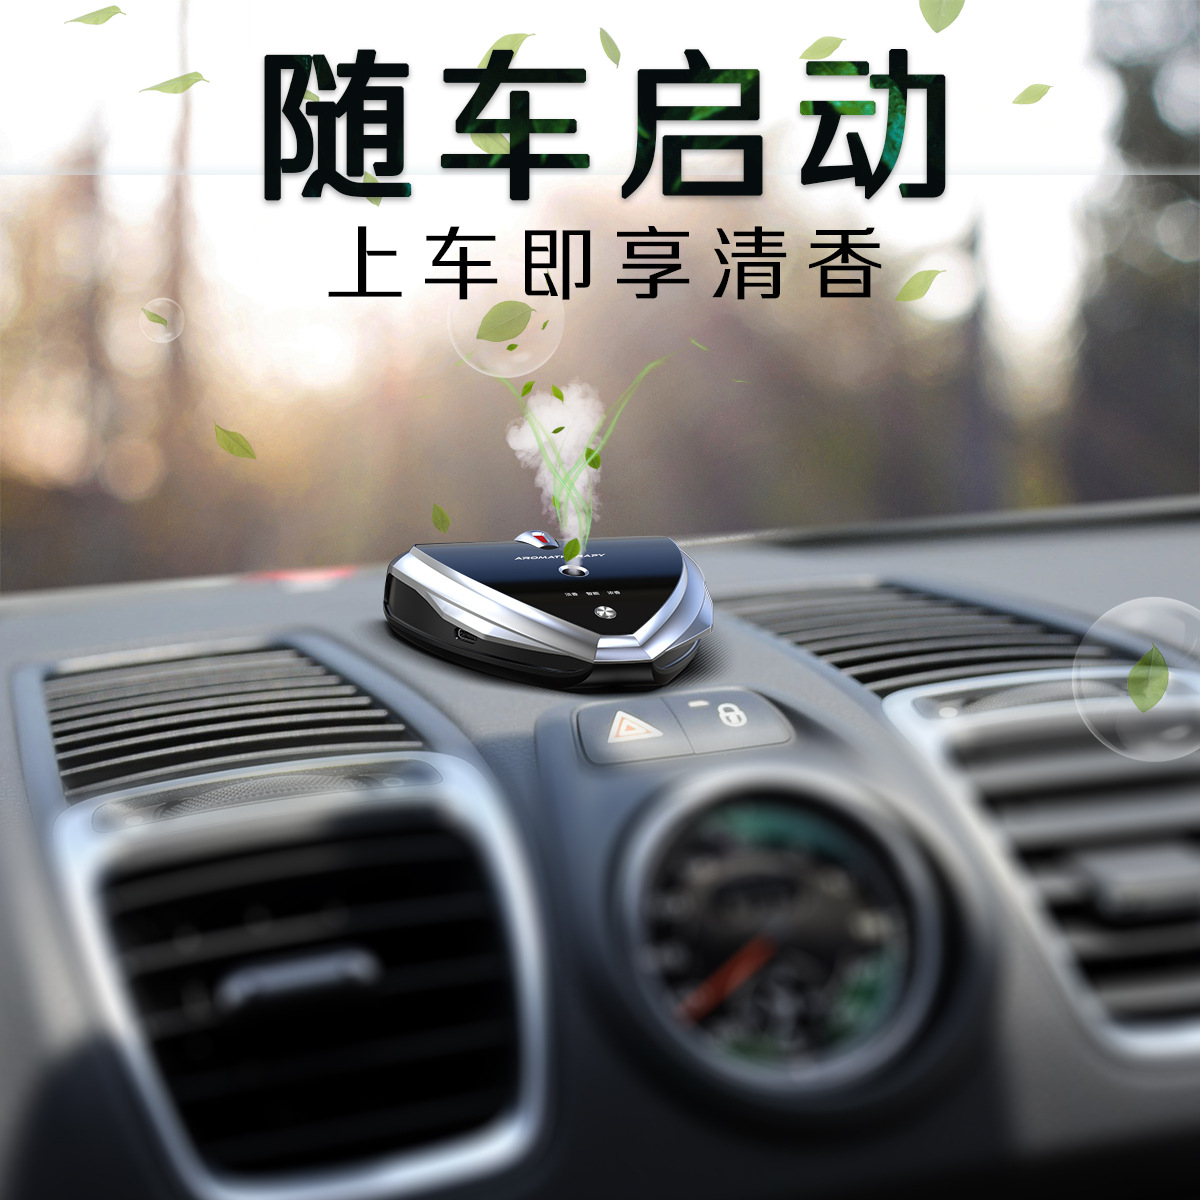 New Smart Spray Car Aromatherapy Stop Sign Perfume Integrated Auto Perfume Gift Decoration